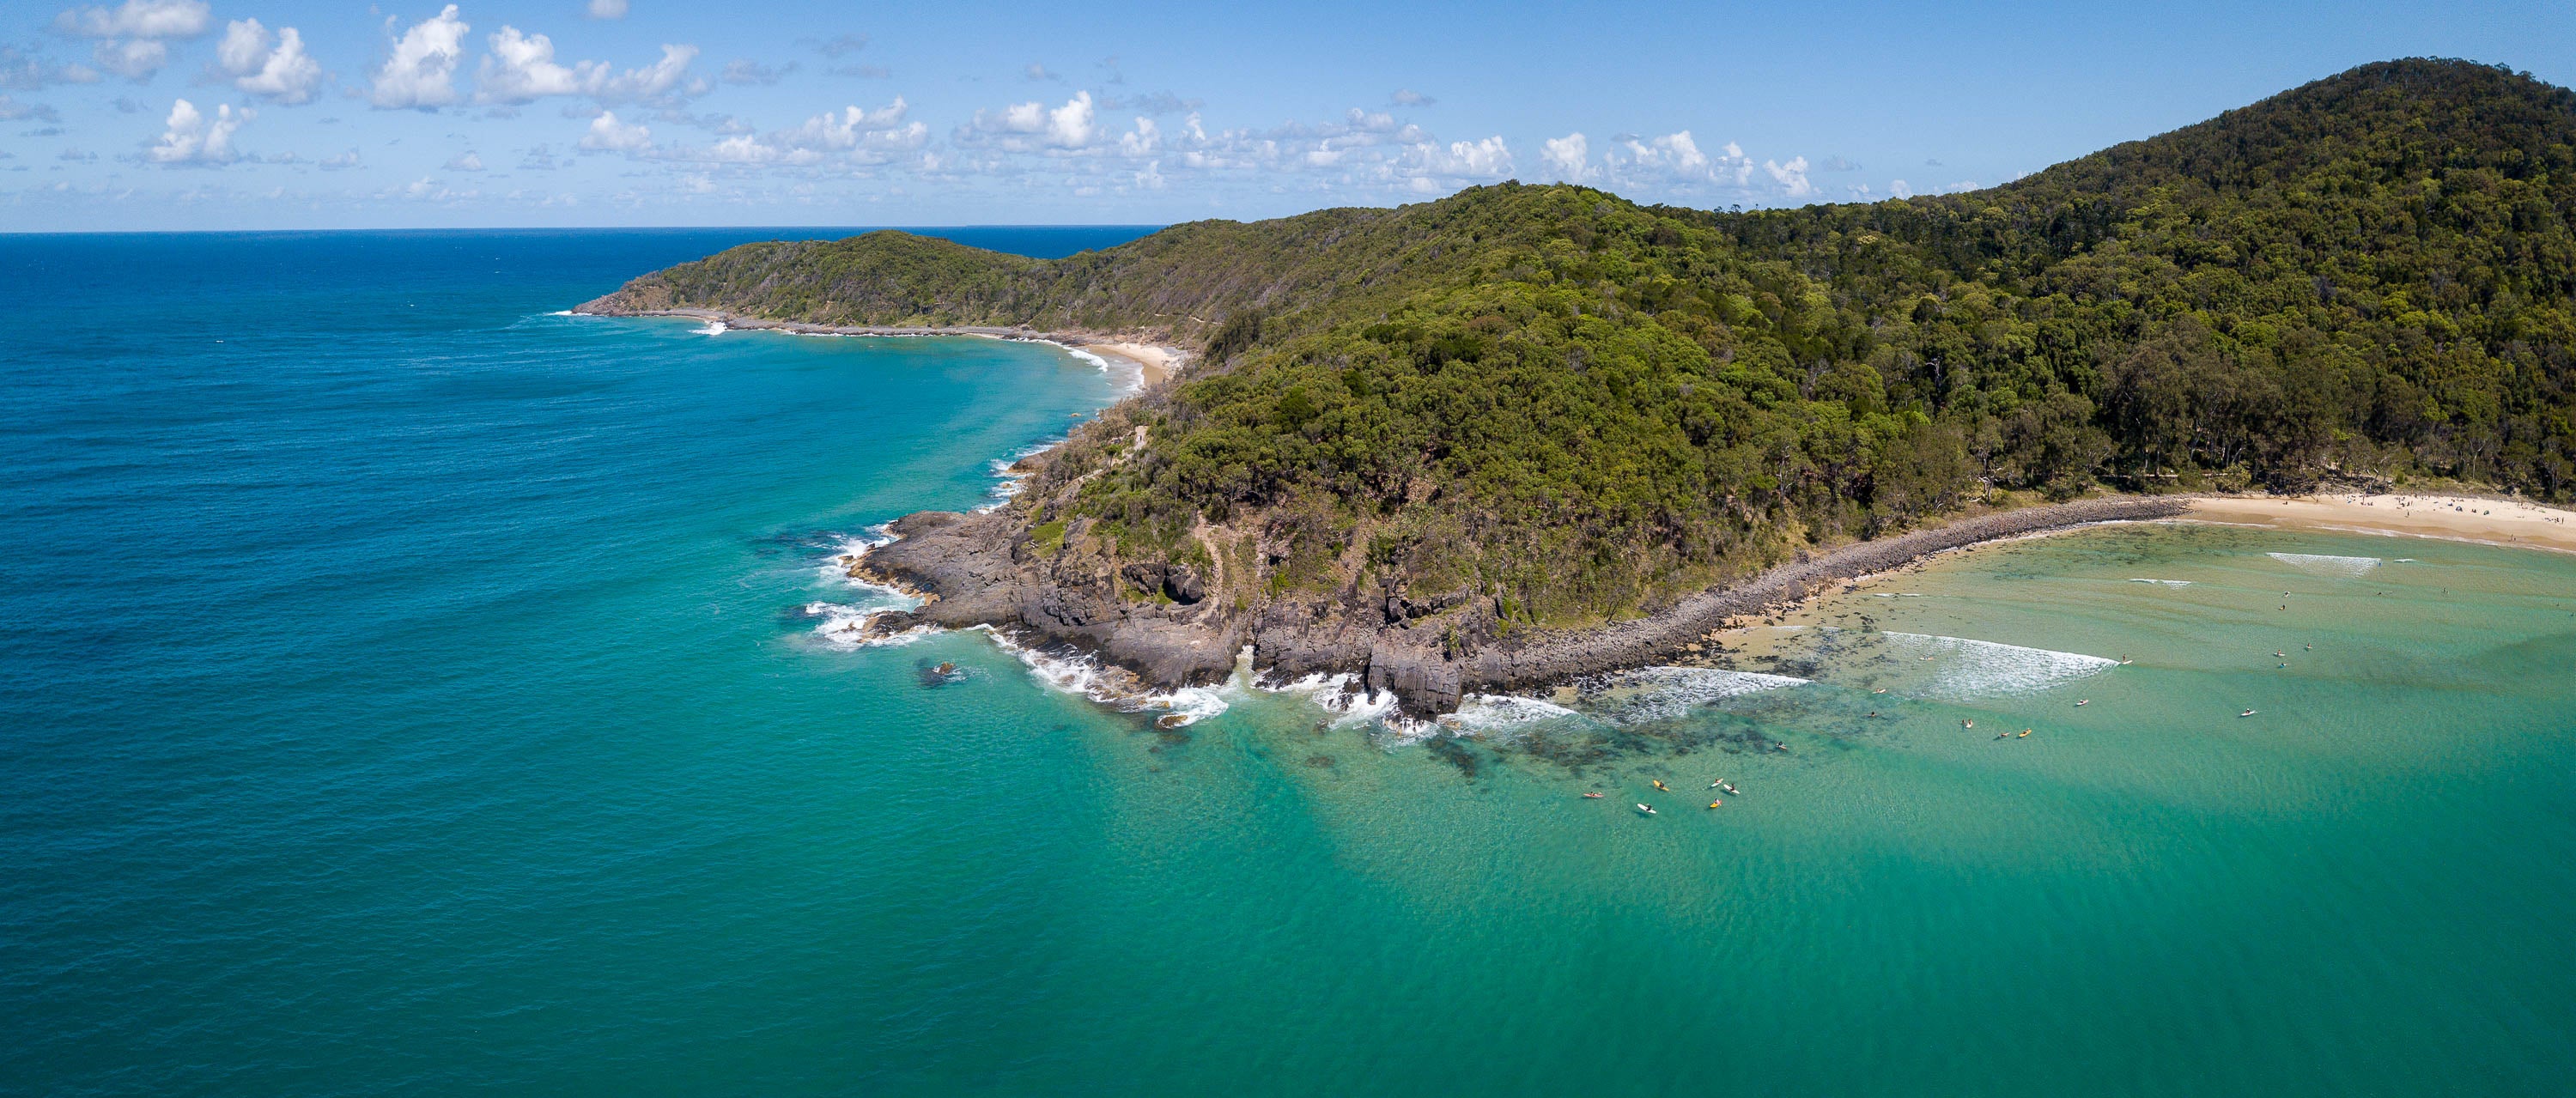 A giant island full of green plants, grass, and bushes, Noosa National Park, Queensland